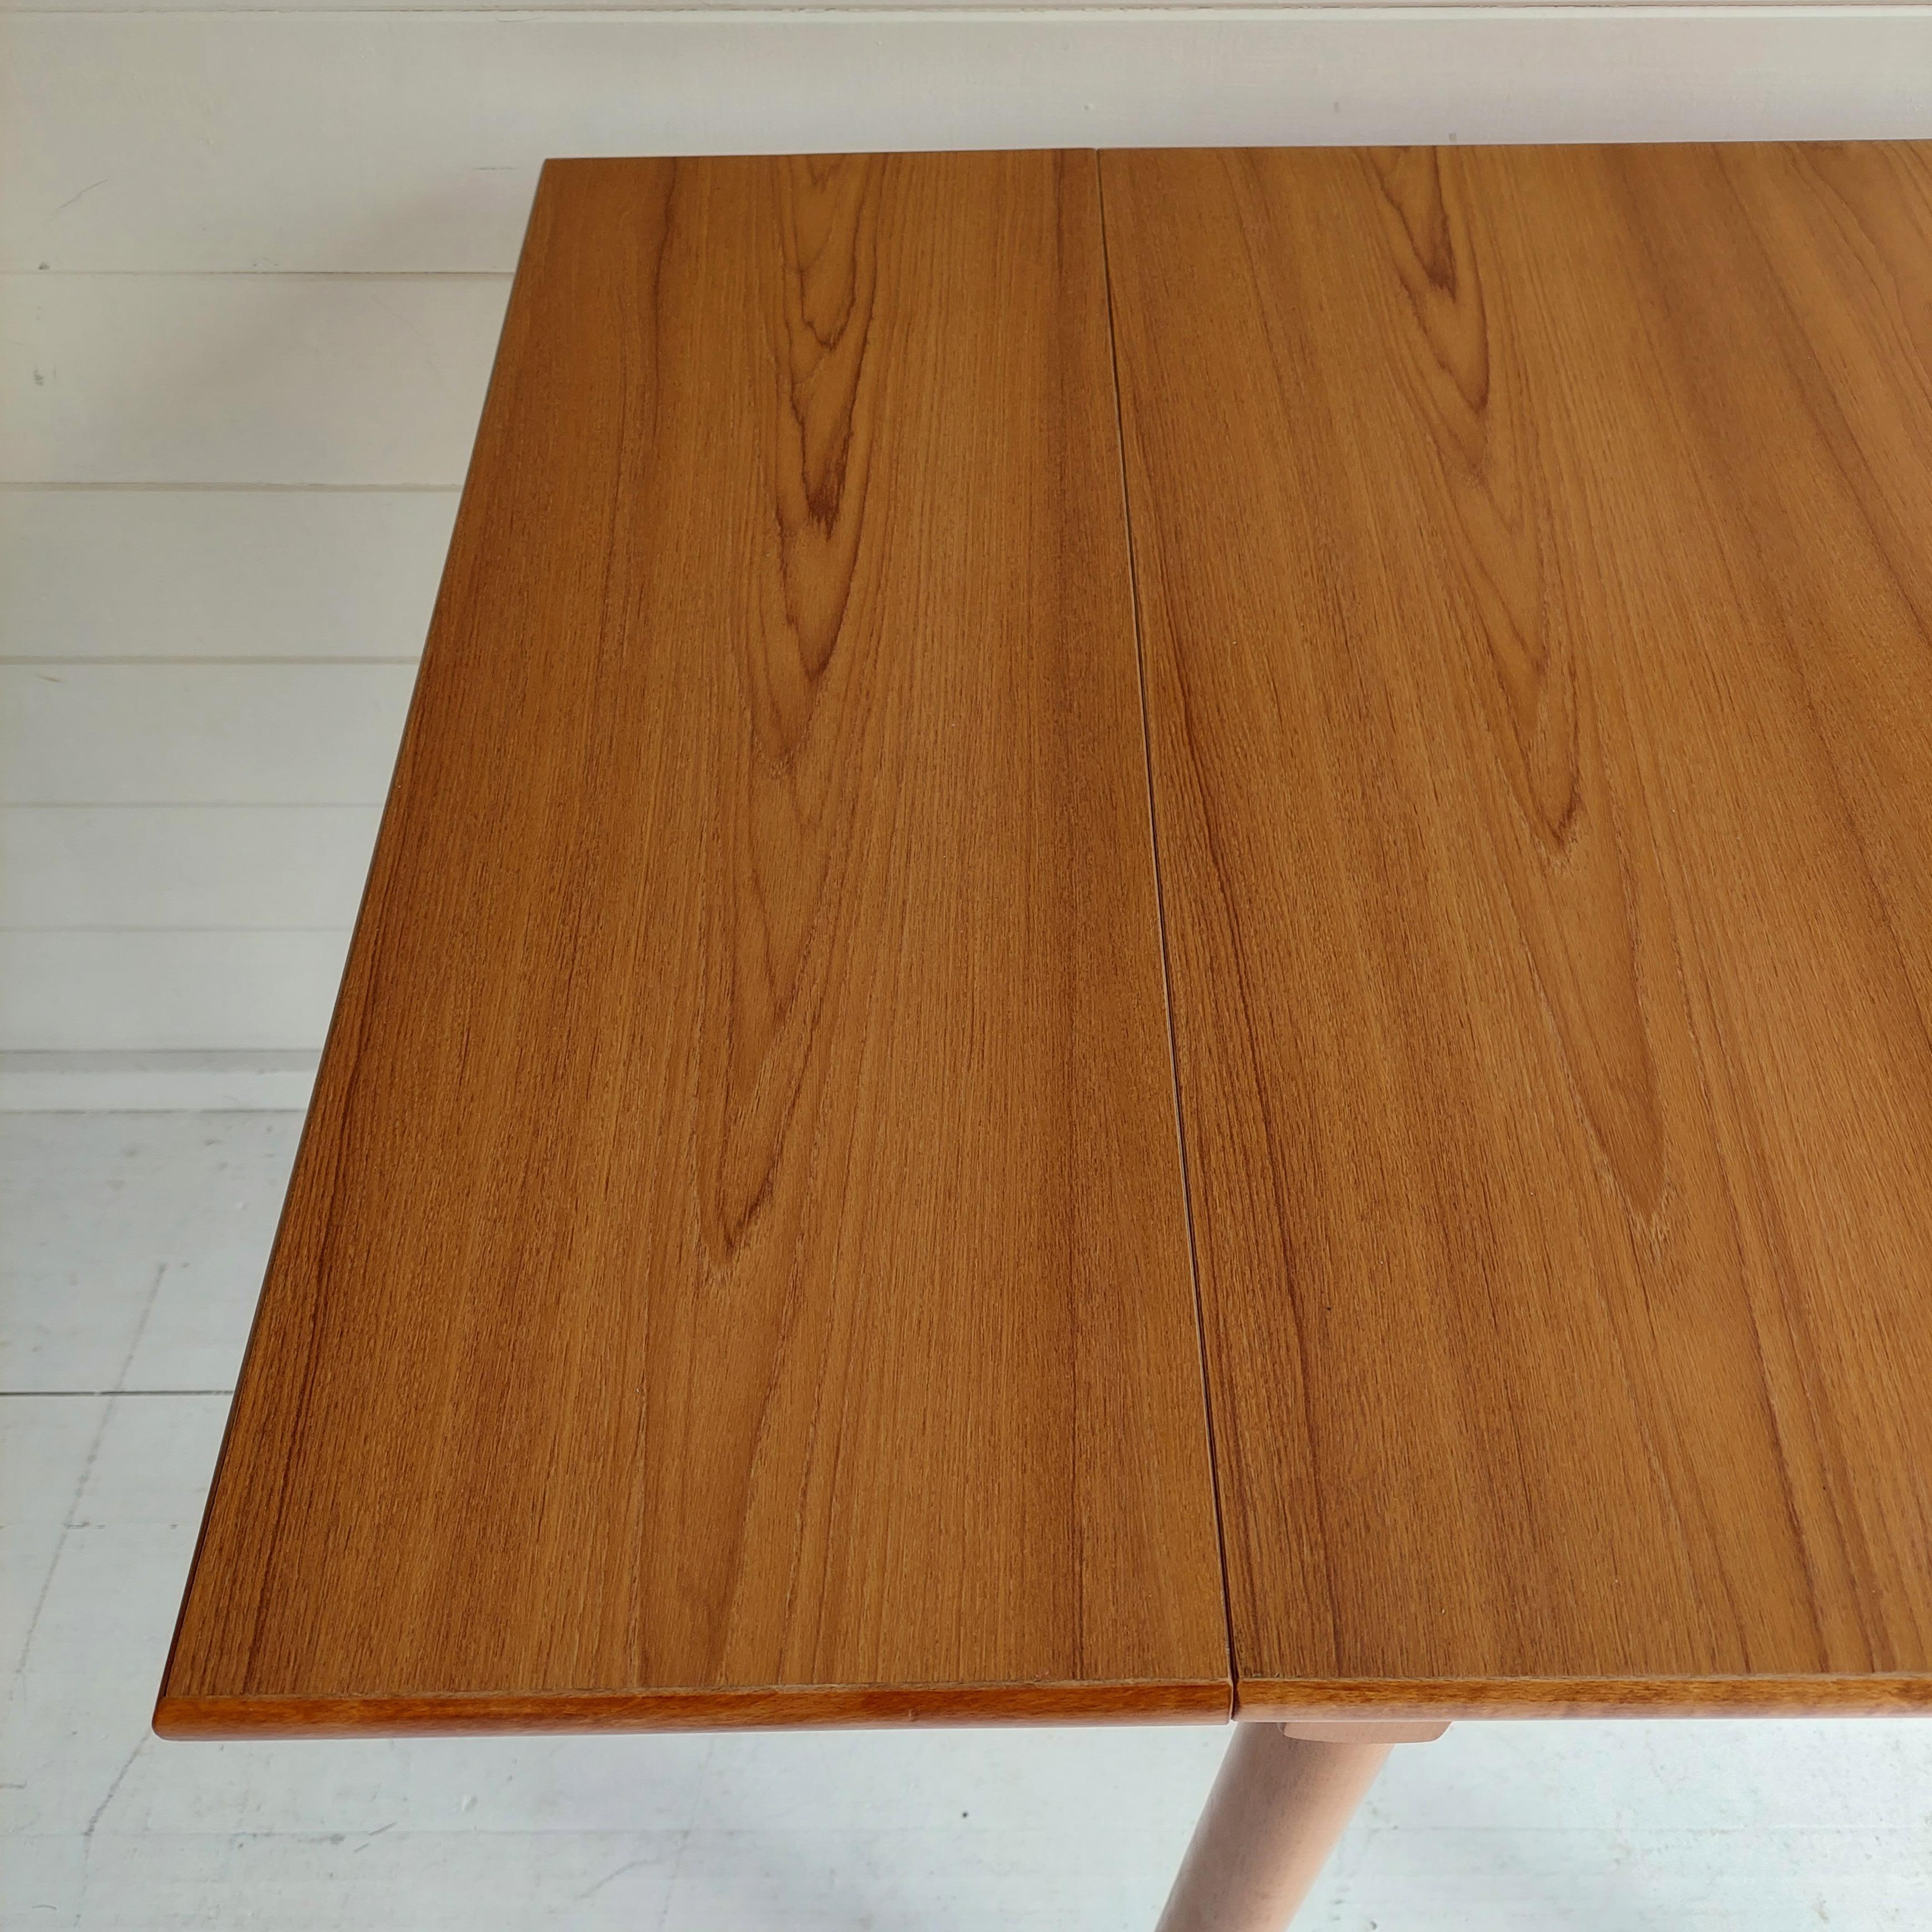 Late Mid-Century Wood Effect Laminate Drop Leaf Kitchen Dining Table 2